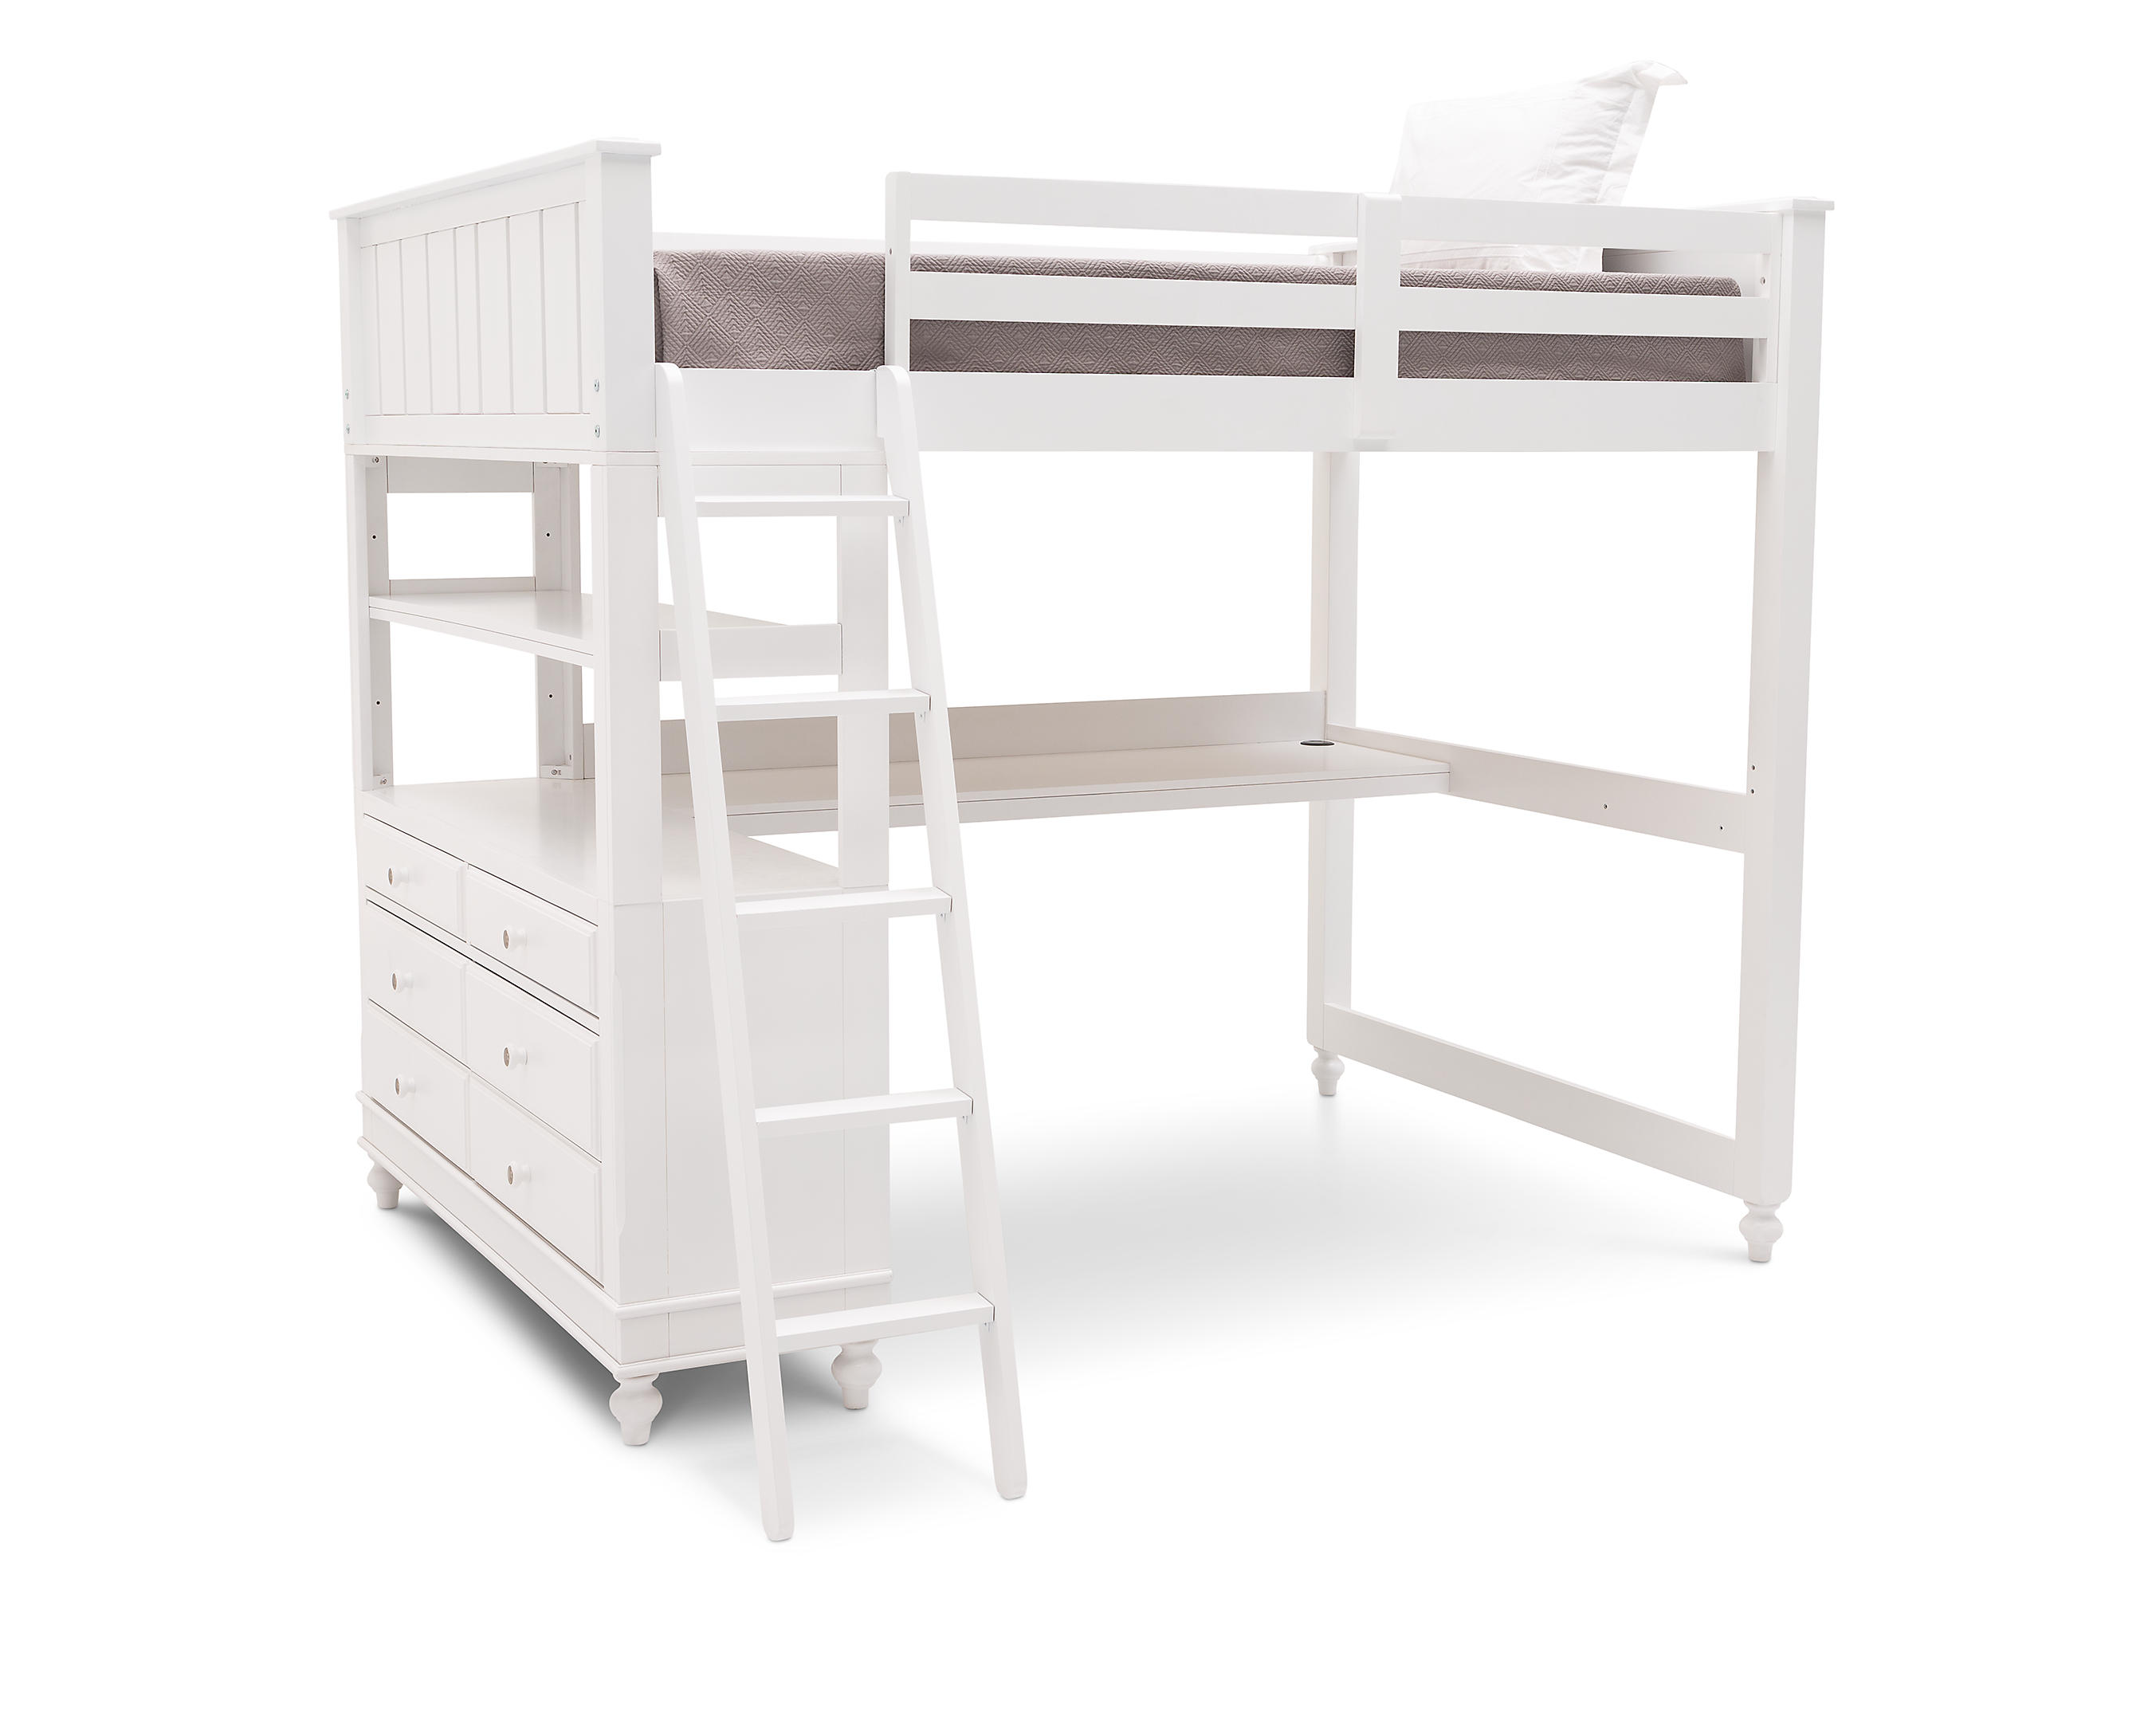 Lake House Loft Bed With Desk, Bunk Beds And Loft Beds